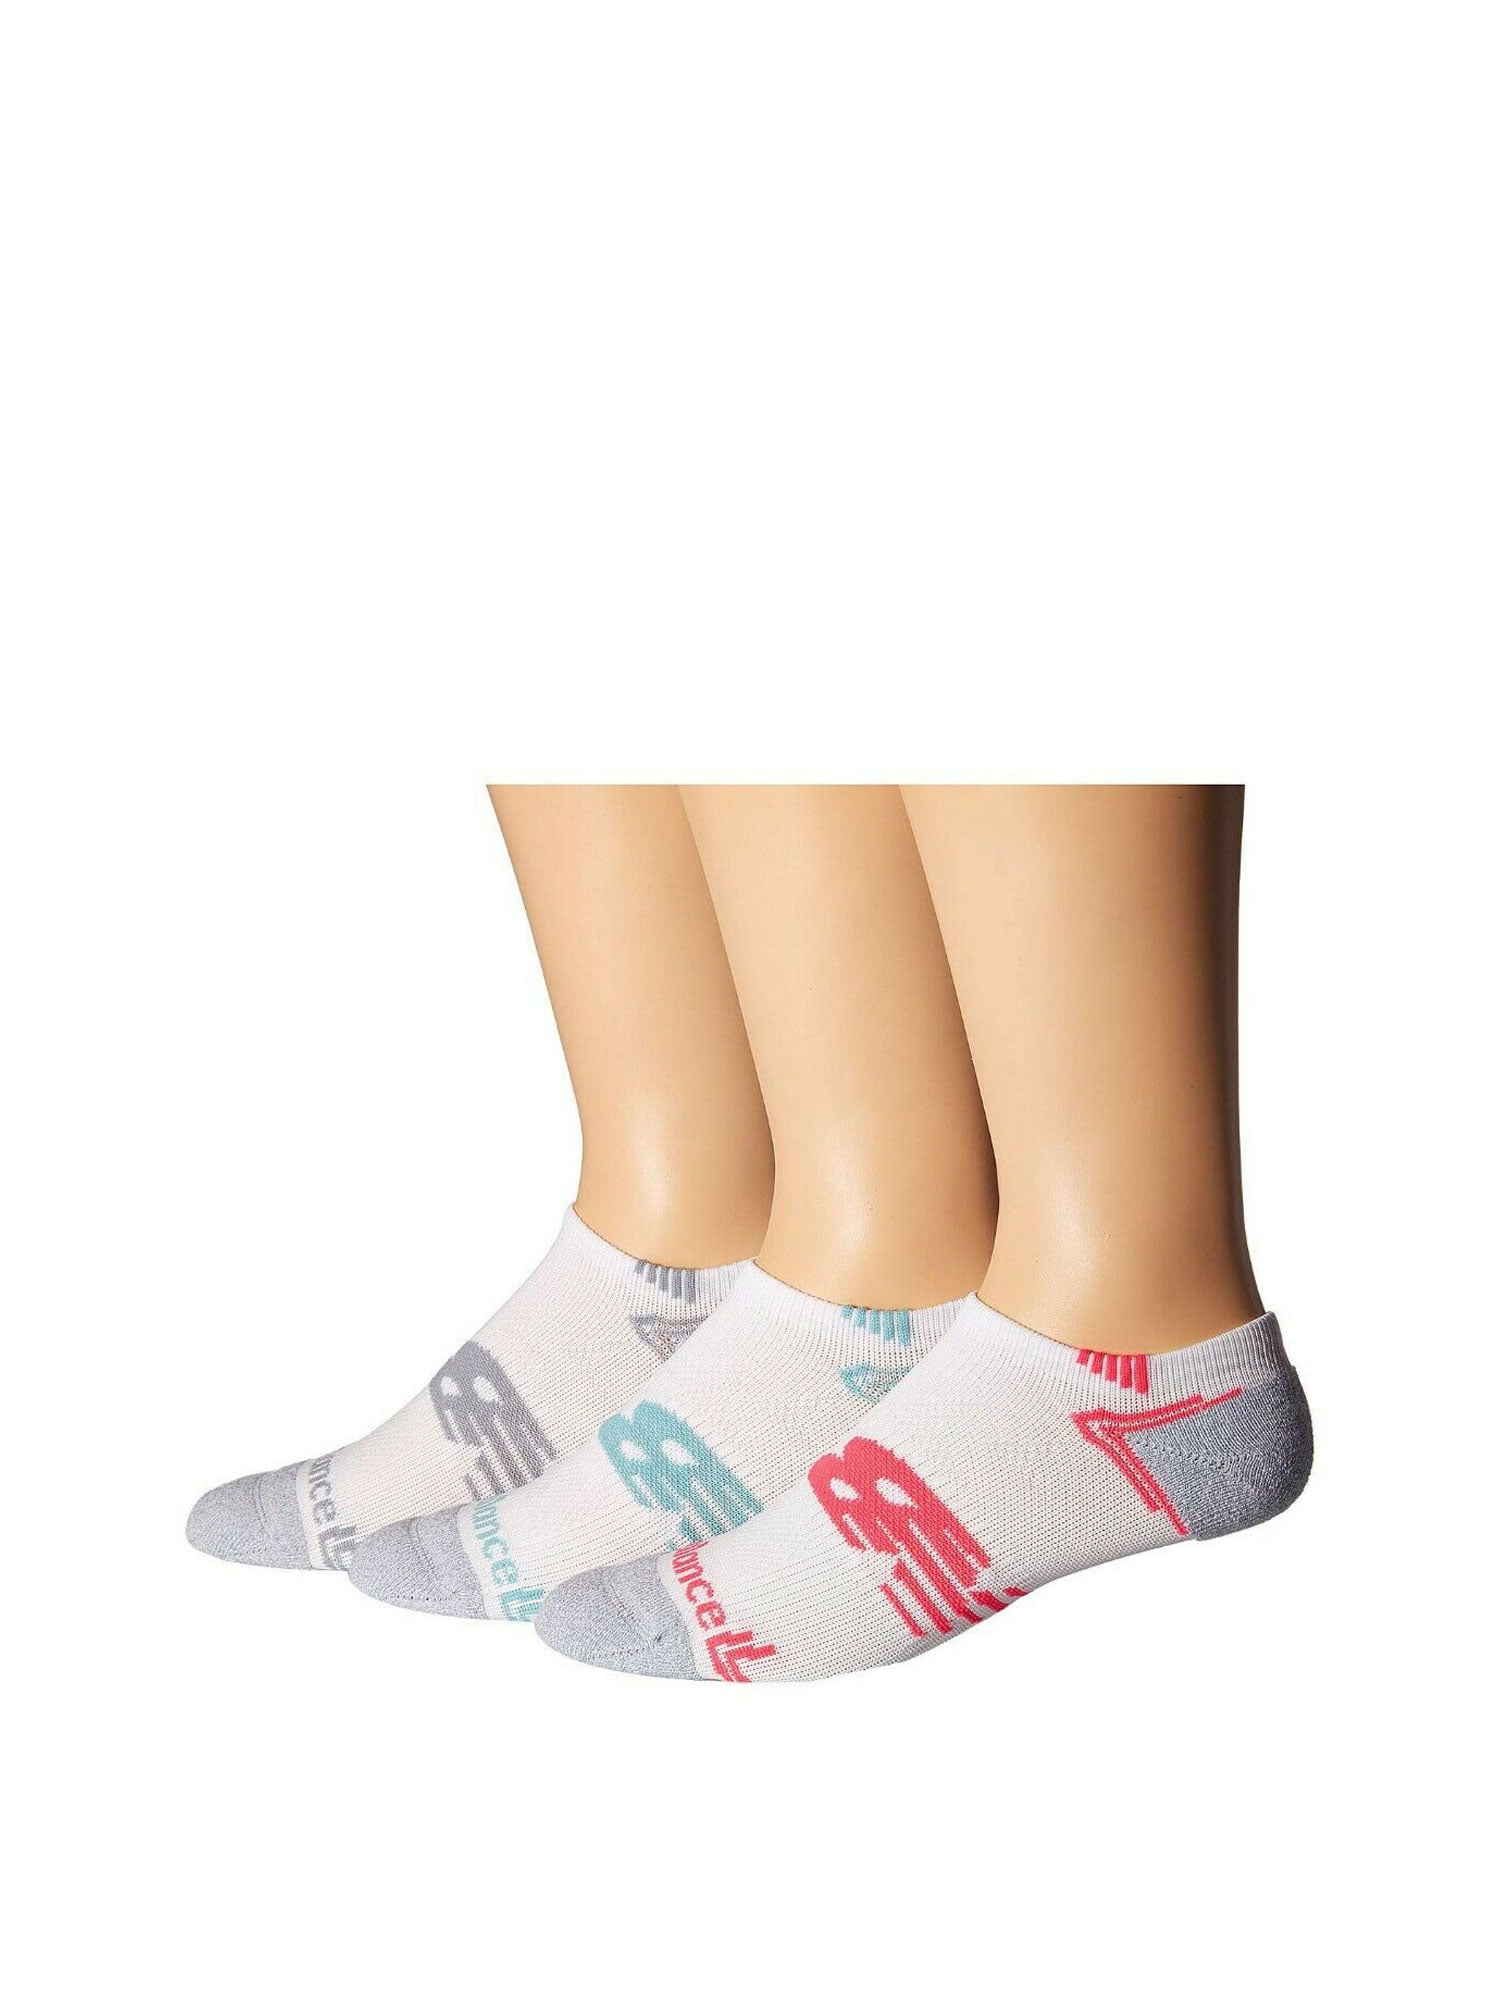 New Balance Synthetic Performance No Show Socks 3 Pack in Blue Womens Hosiery New Balance Hosiery 